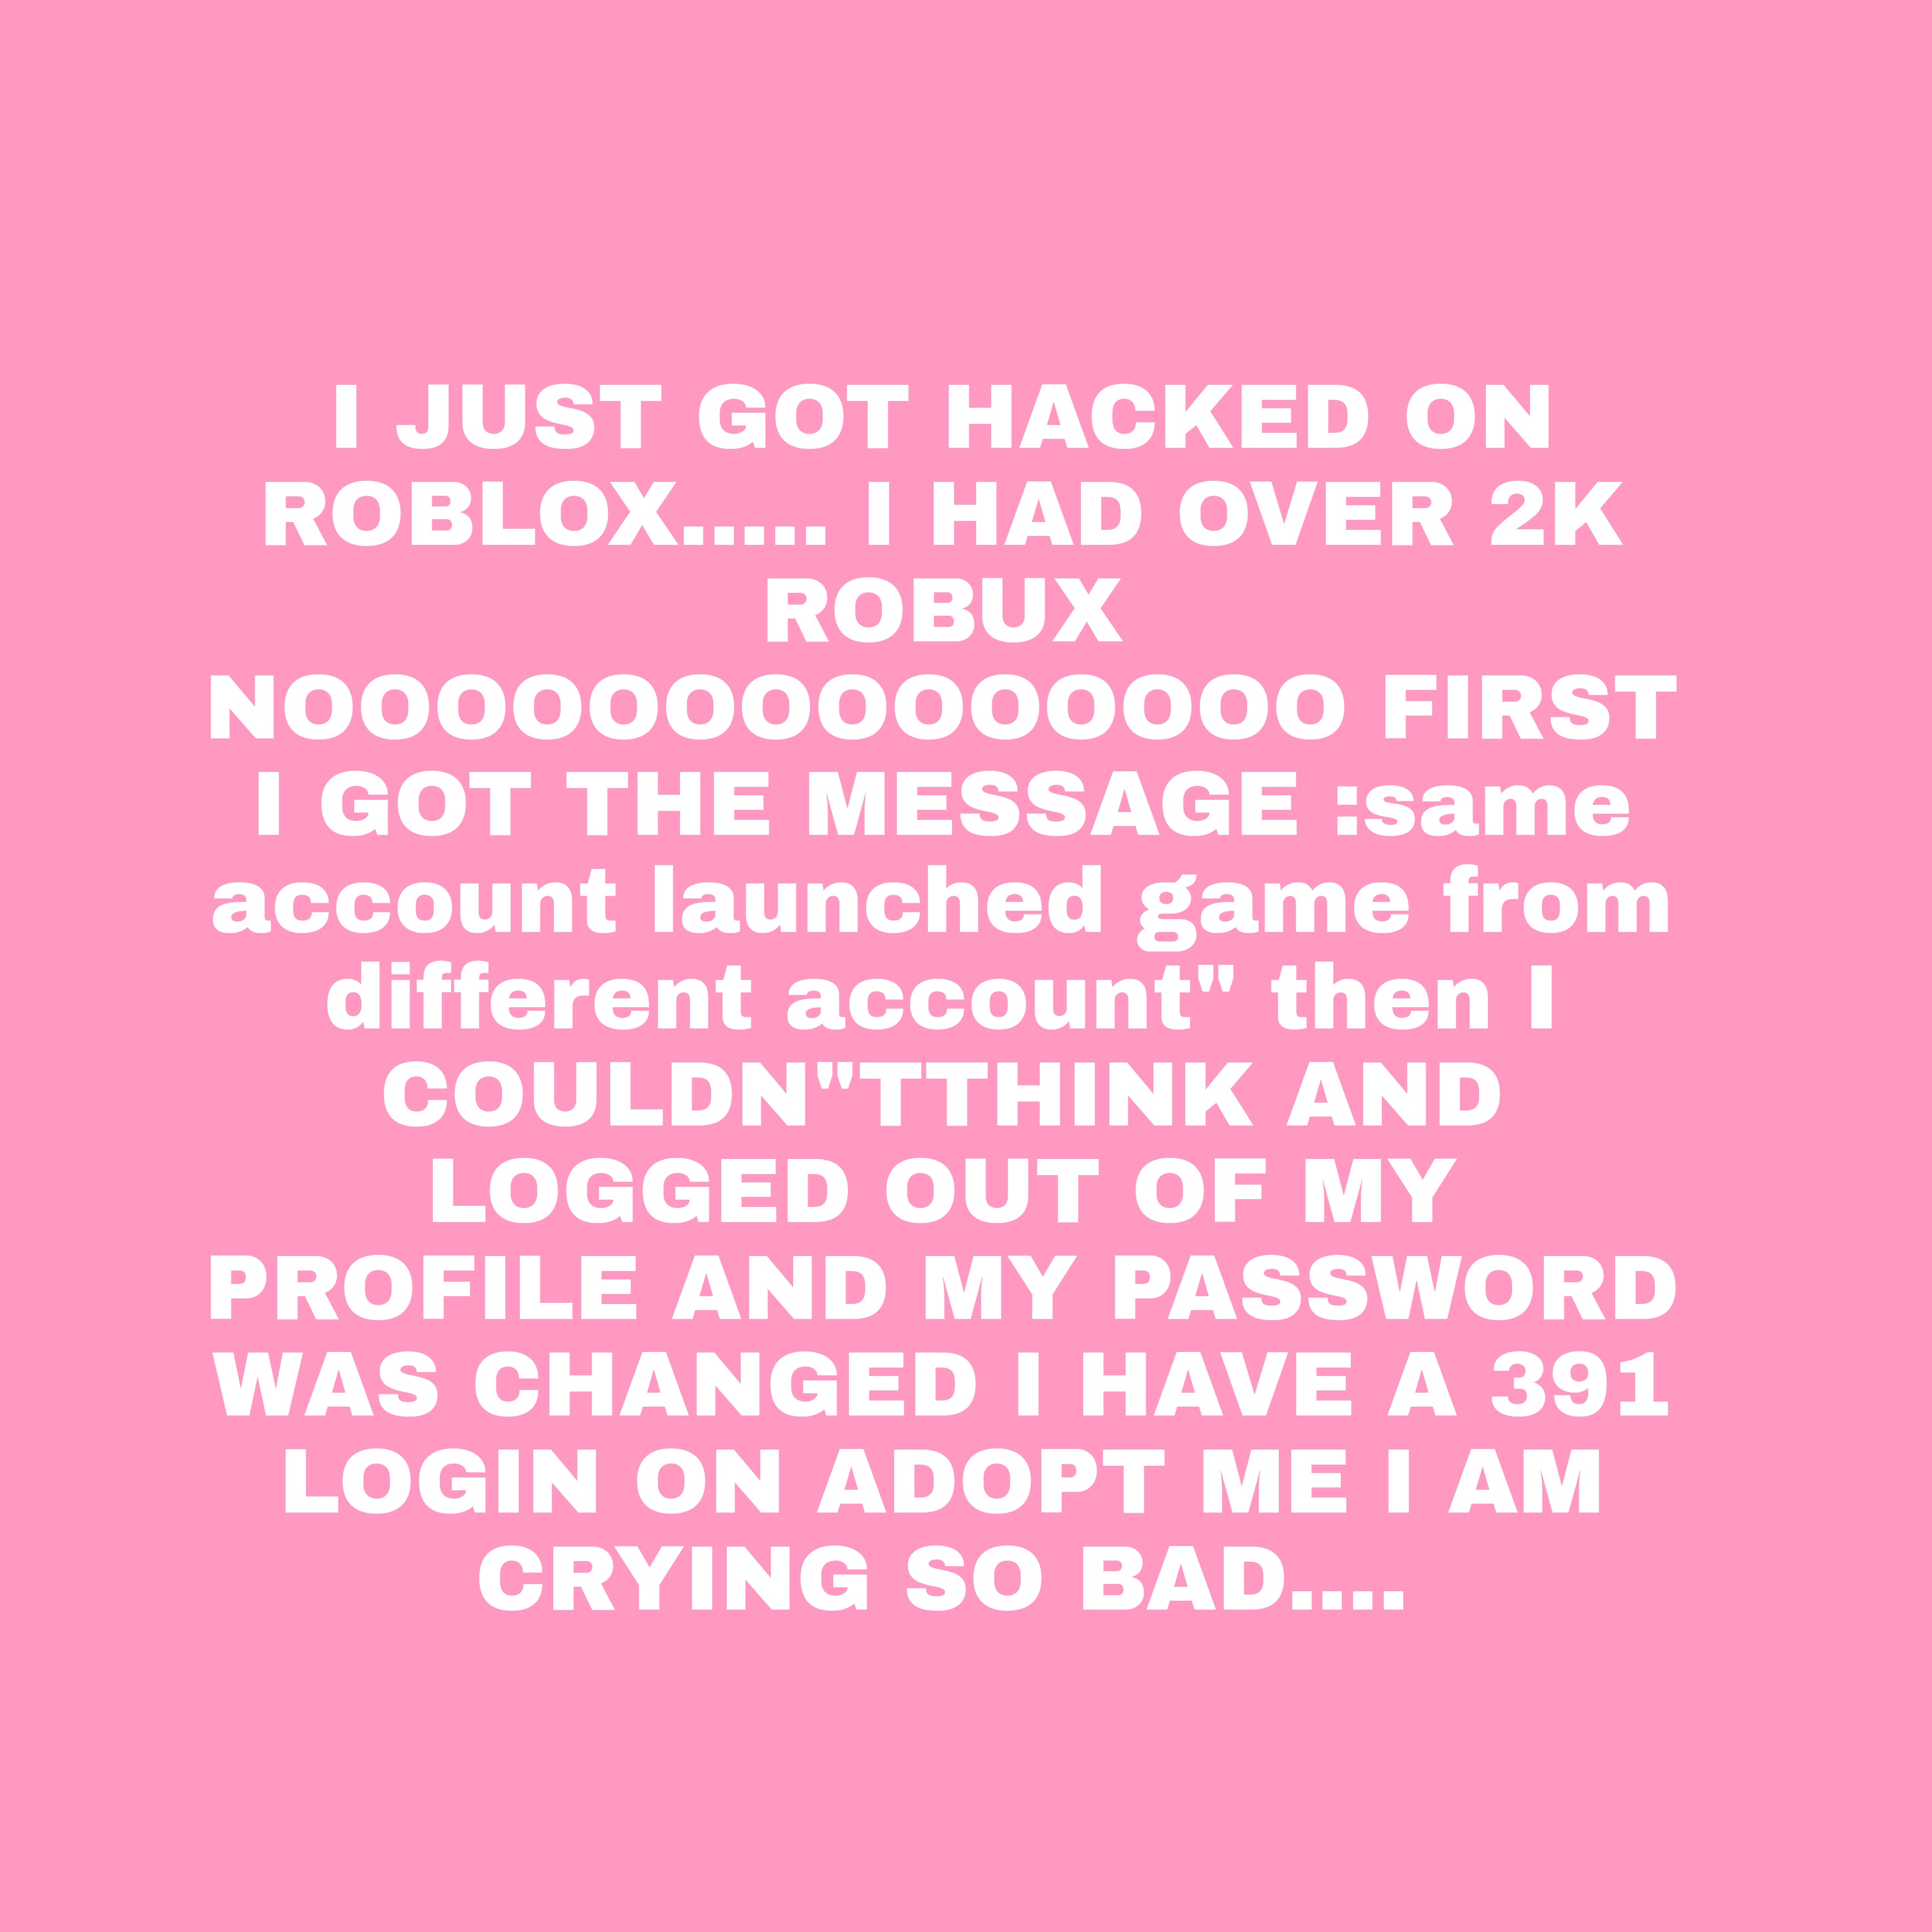 Hacked Similar Hashtags Picsart - roblox same account launched from different device not hacked